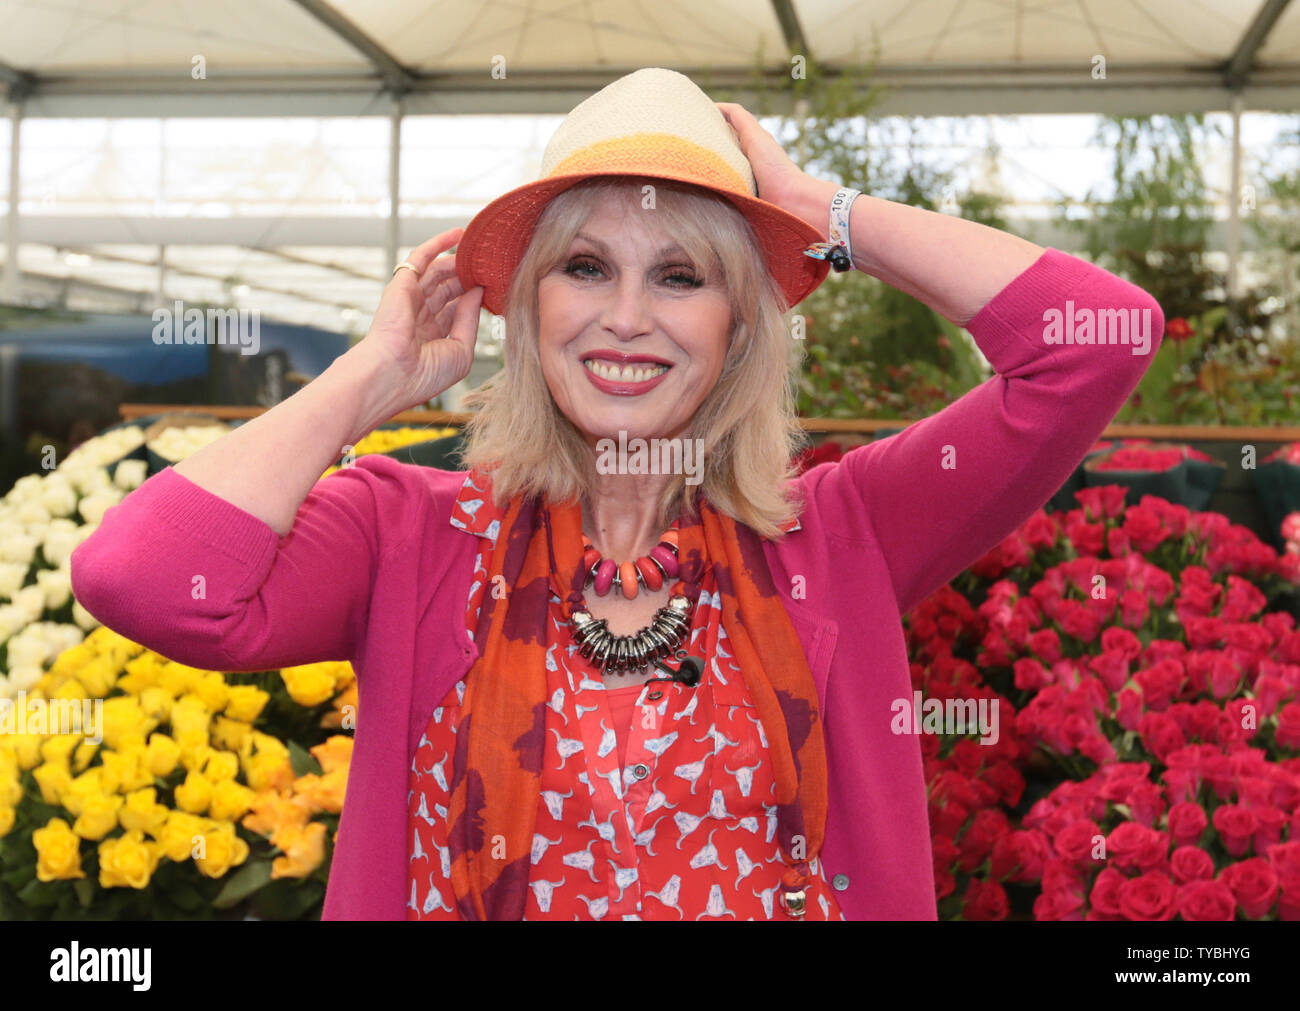 British actress Joanna Lumley poses amongst the roses at the 100th Chelsea Flower Show on in London on Monday, May 20 2013.      UPI/Hugo Philpott Stock Photo